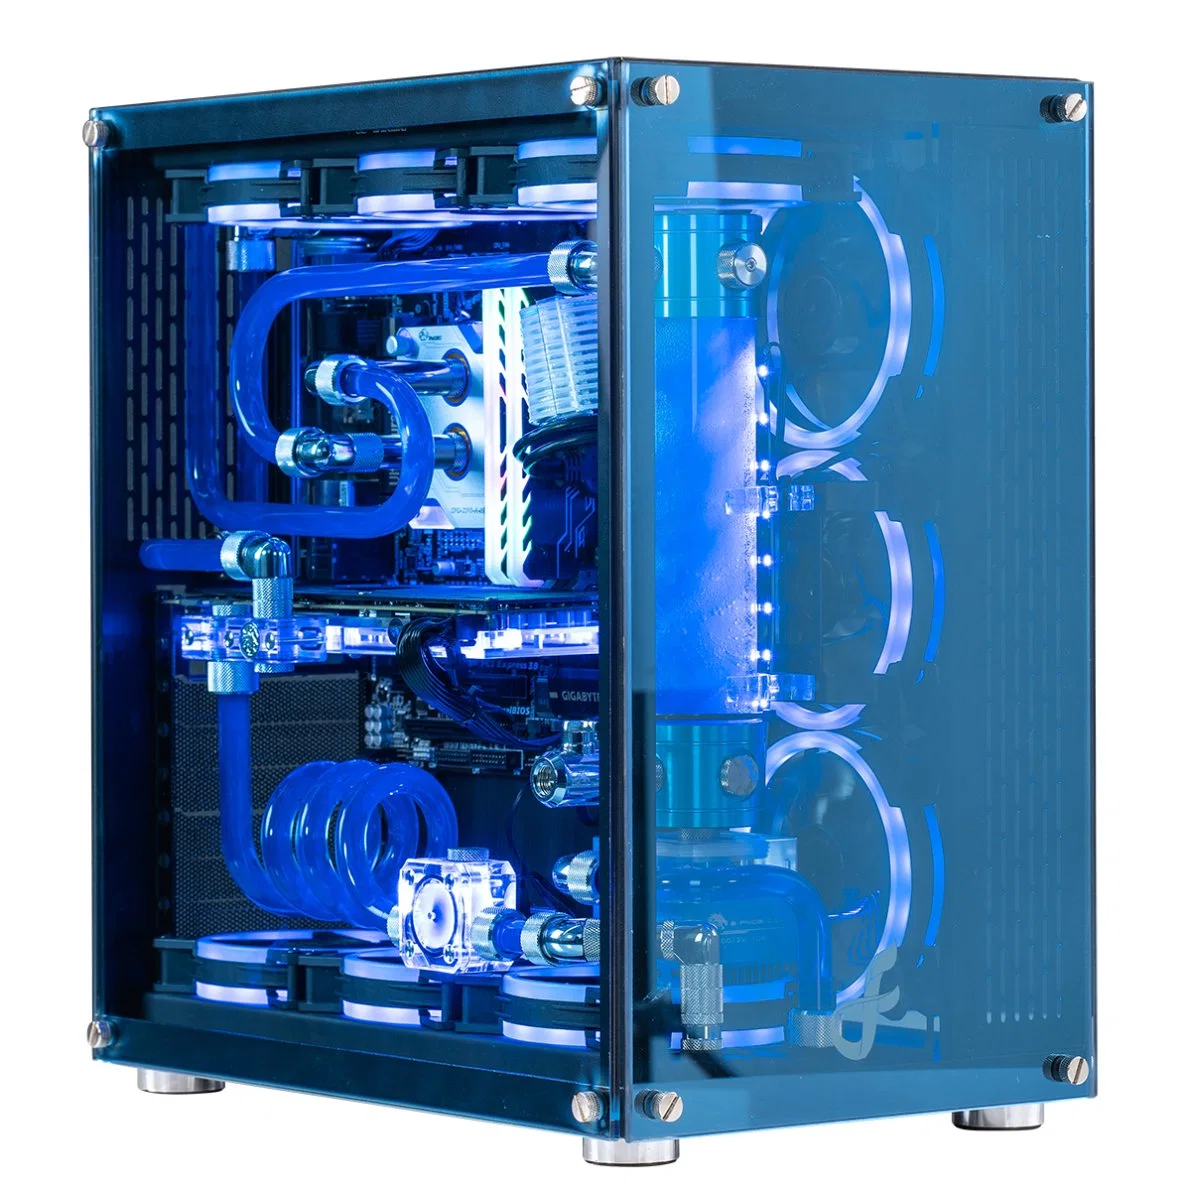 Best Selling PC Case with RGB Fan and Water Cooling